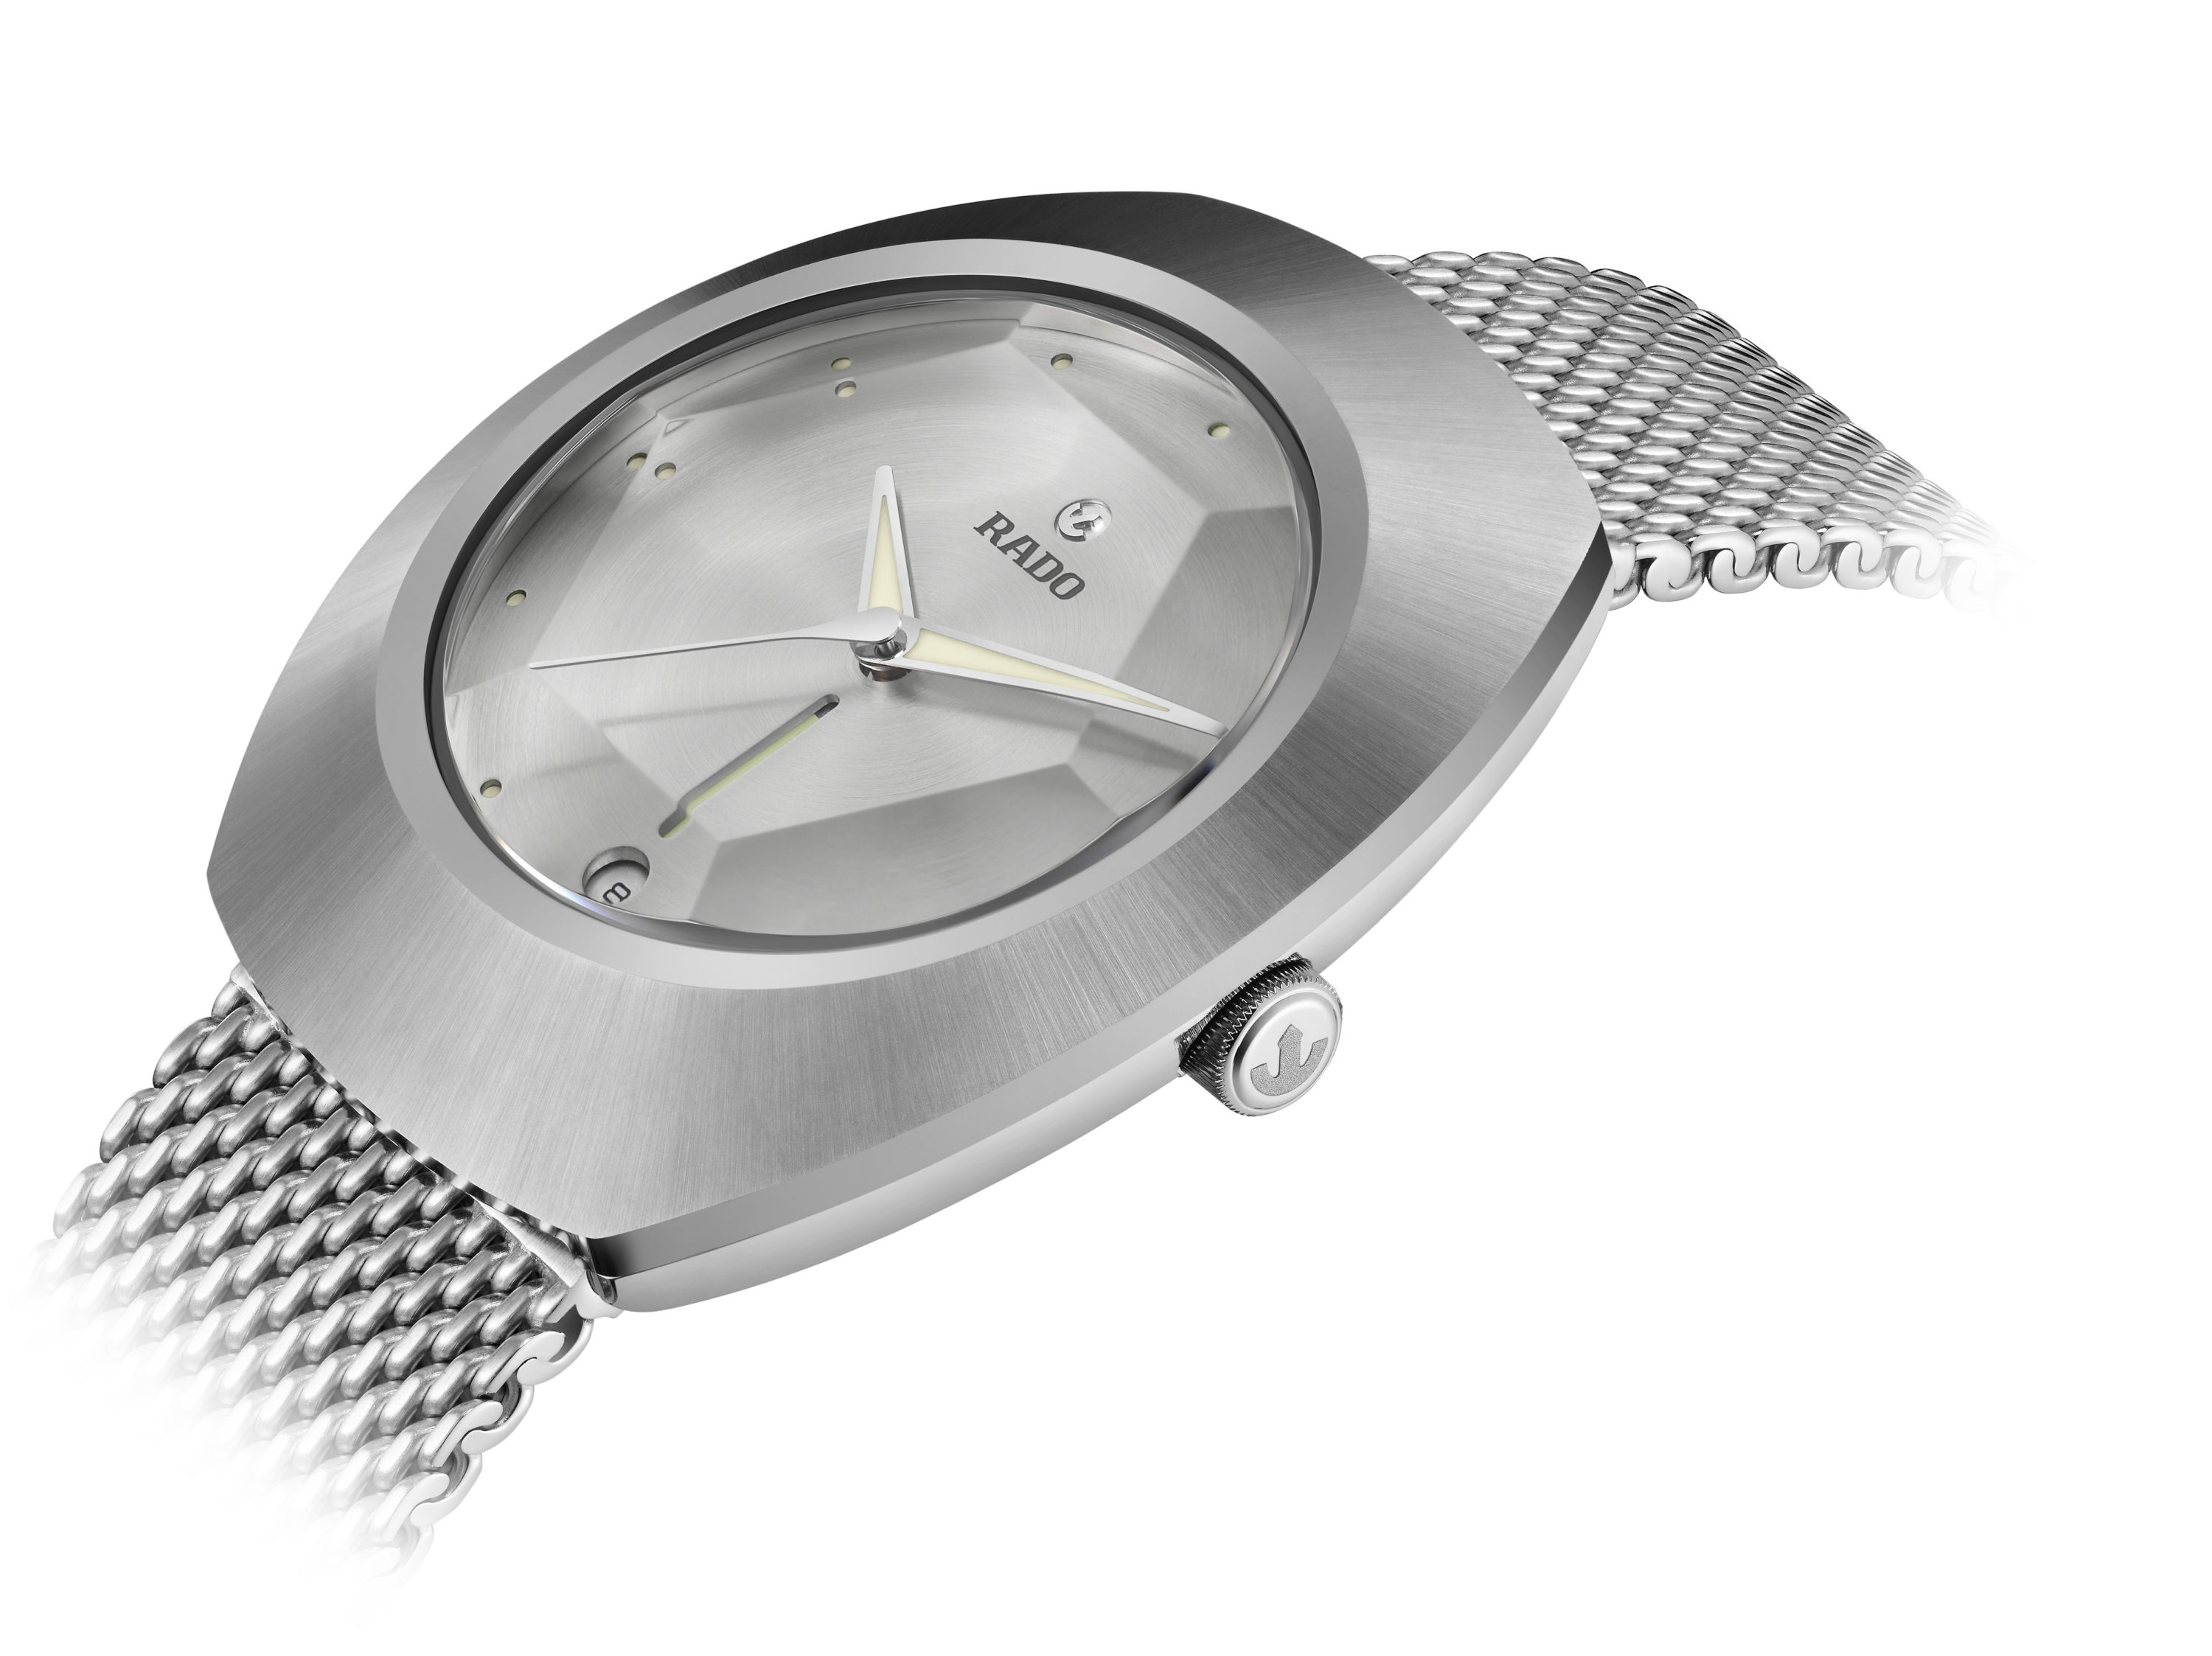 Rado Reimagines Its DiaStar with Two Stunning Editions